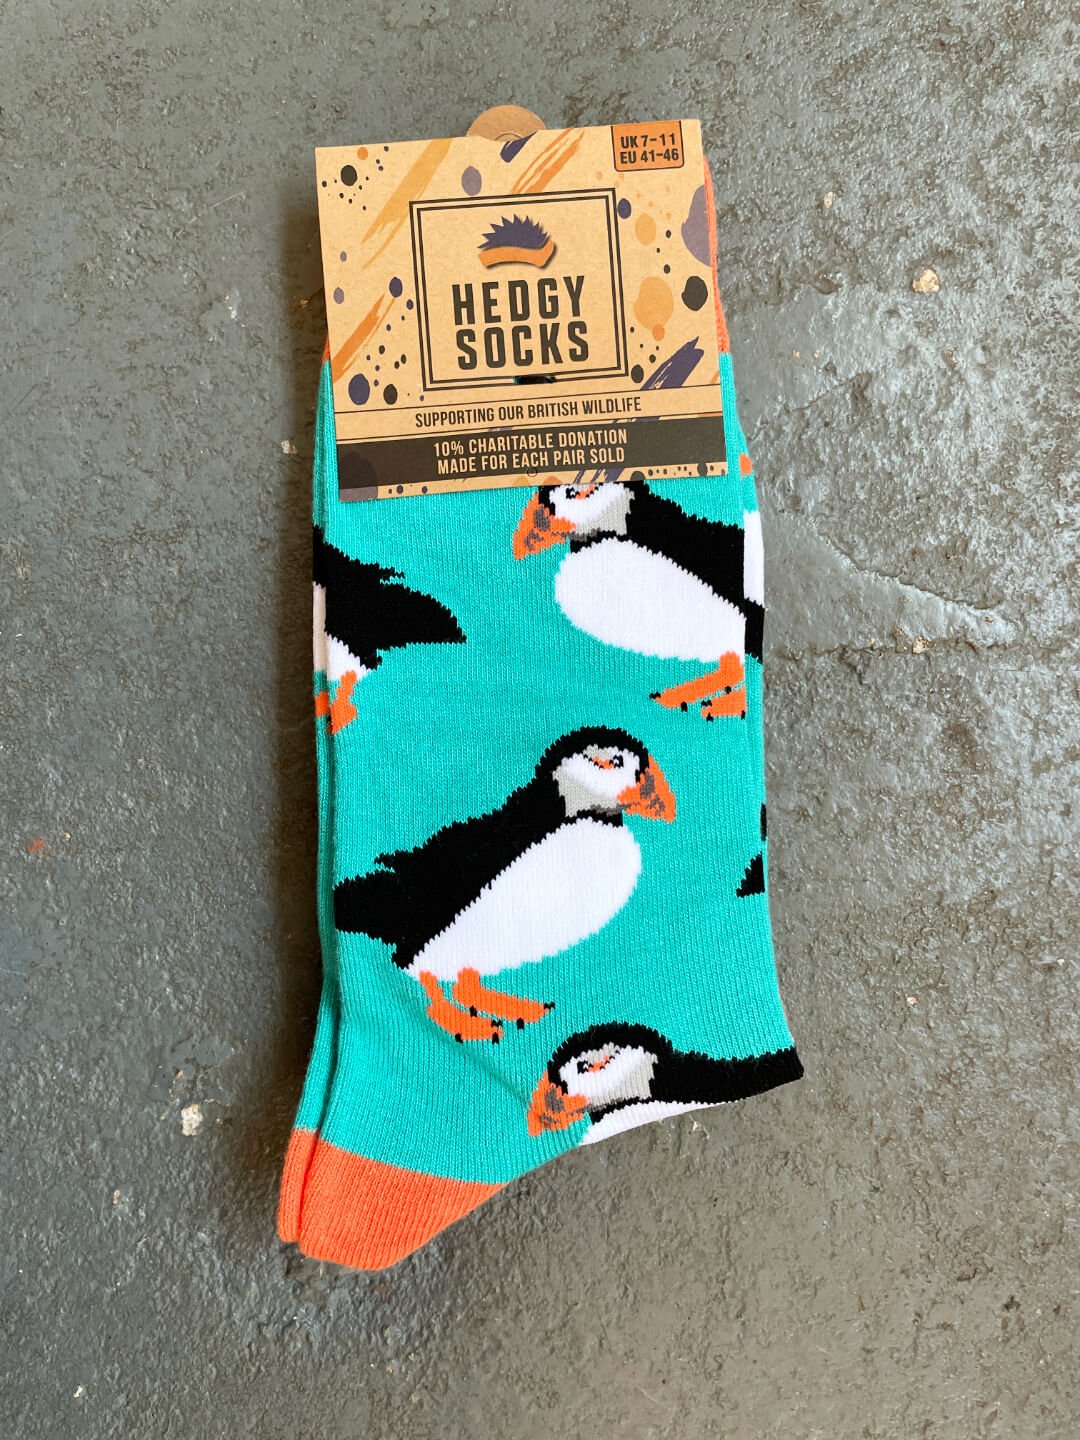 Puffin Hedgy Socks